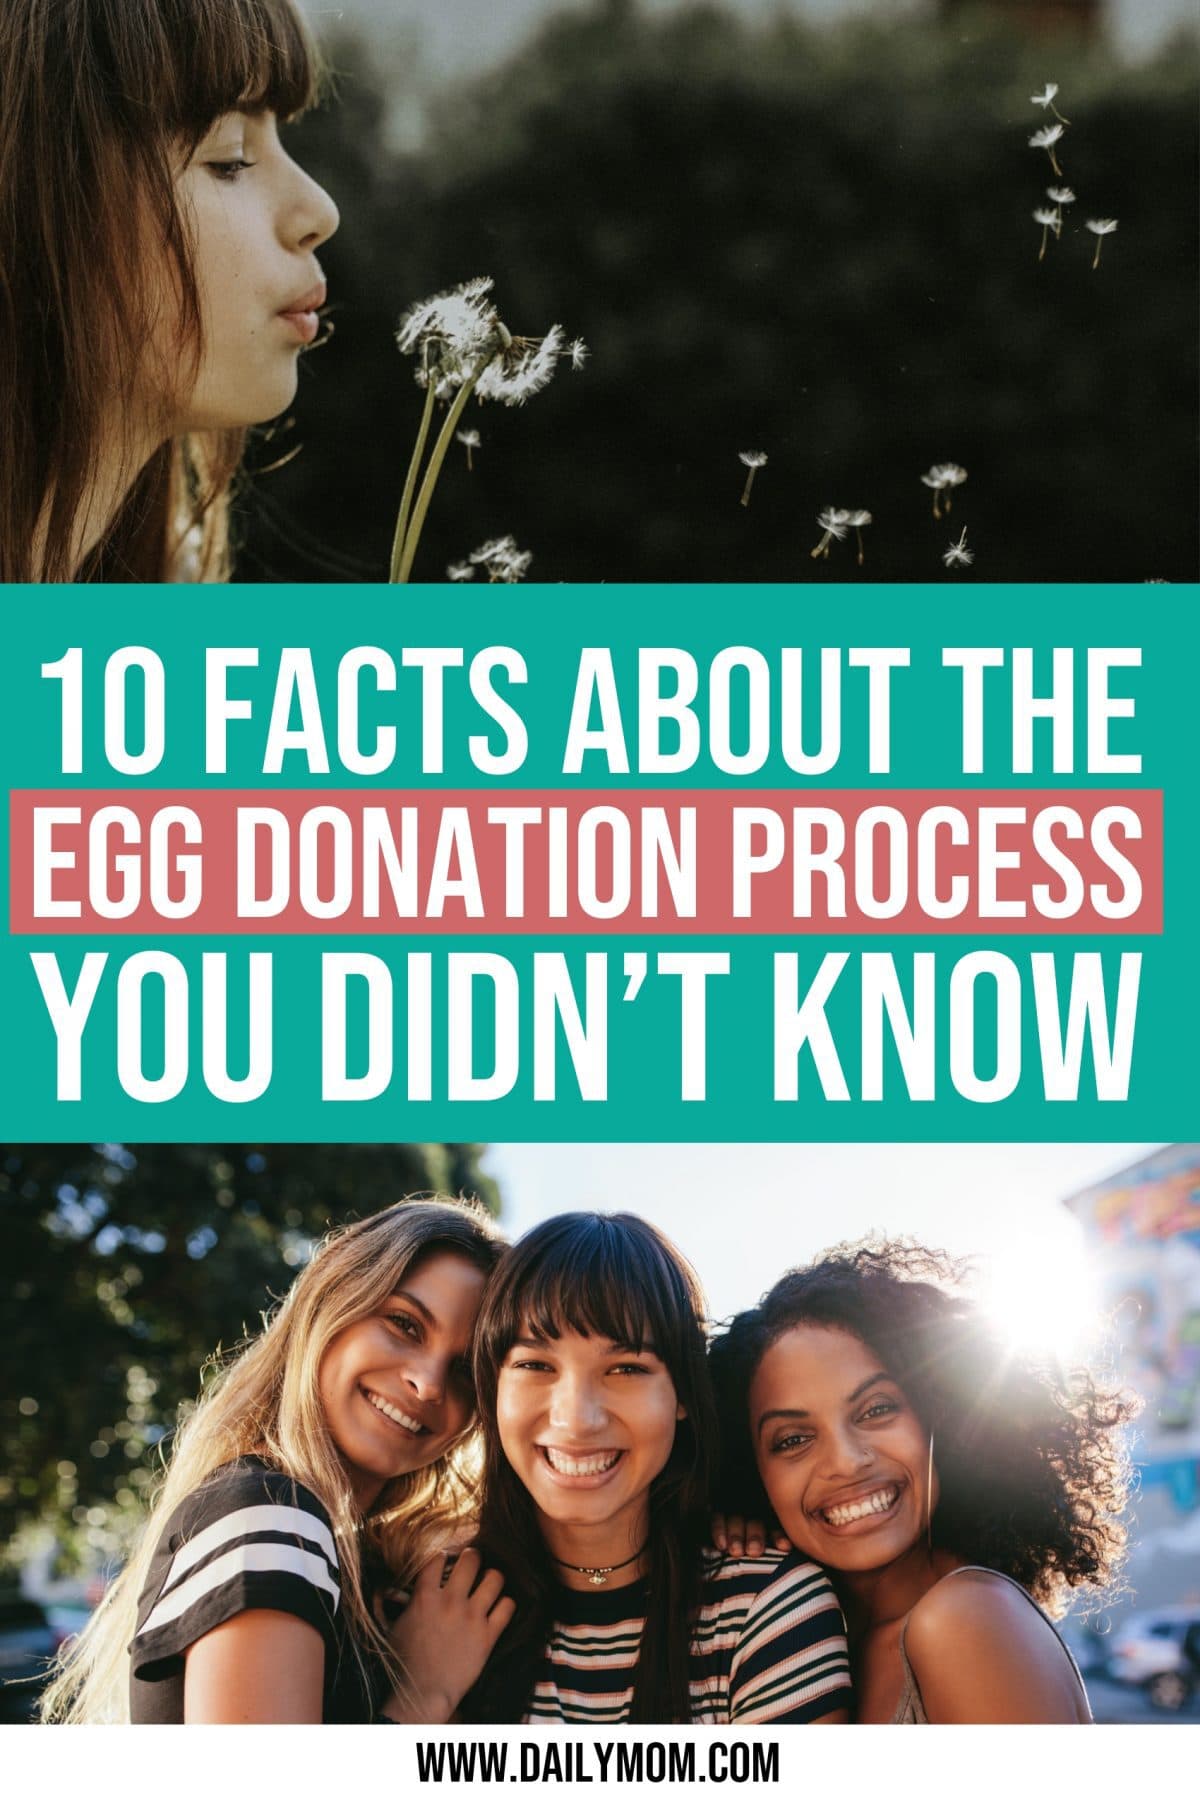 10 Facts About The Egg Donation Process You Didn’t Know